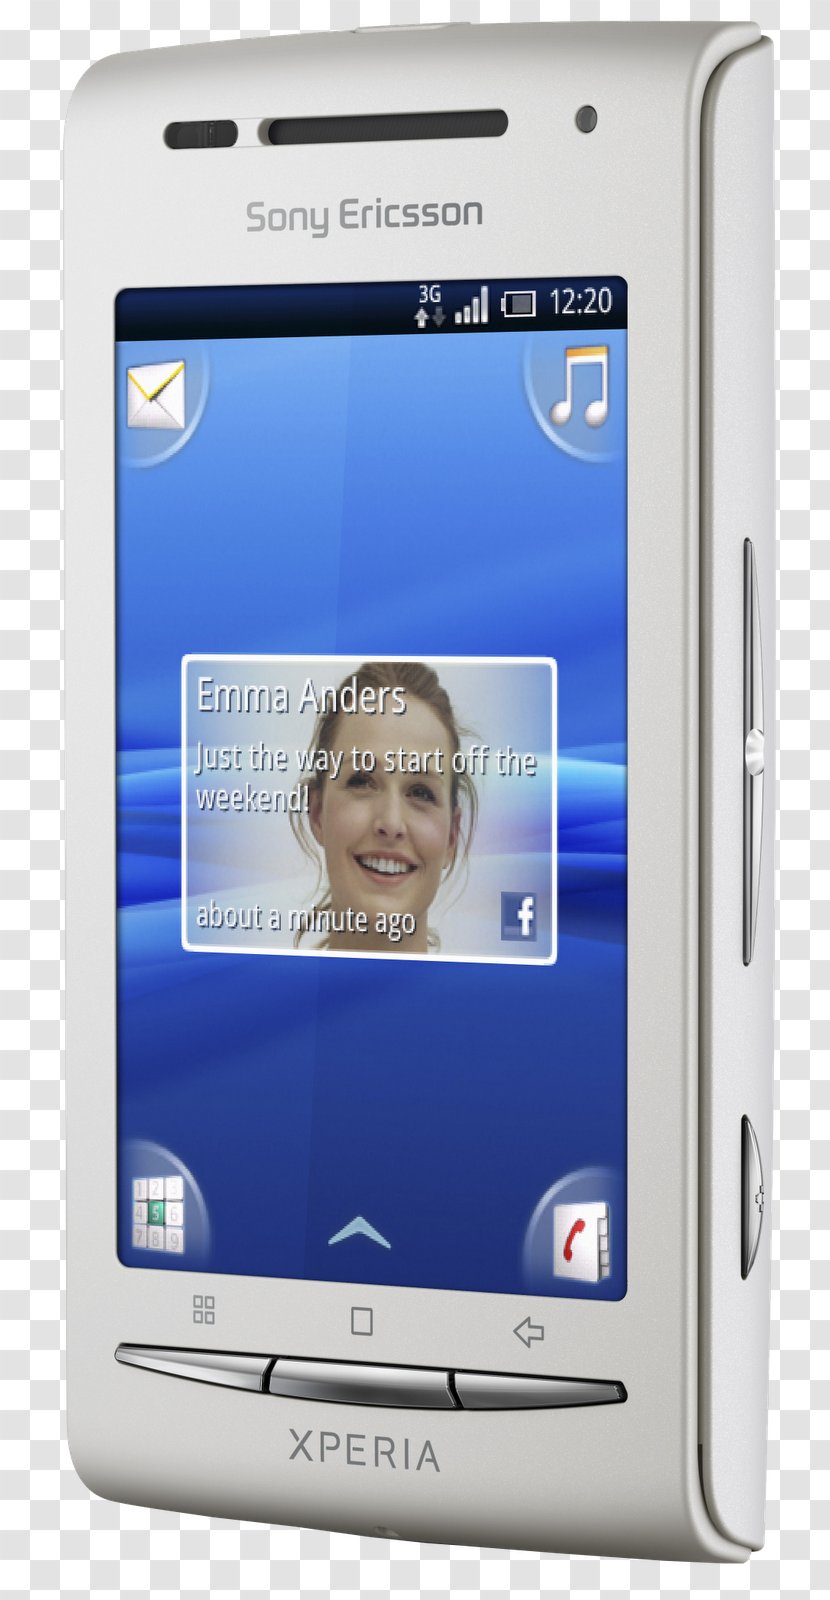 Xperia Play Sony Ericsson Mini Neo Arc - Technology - Smartphone Transparent PNG